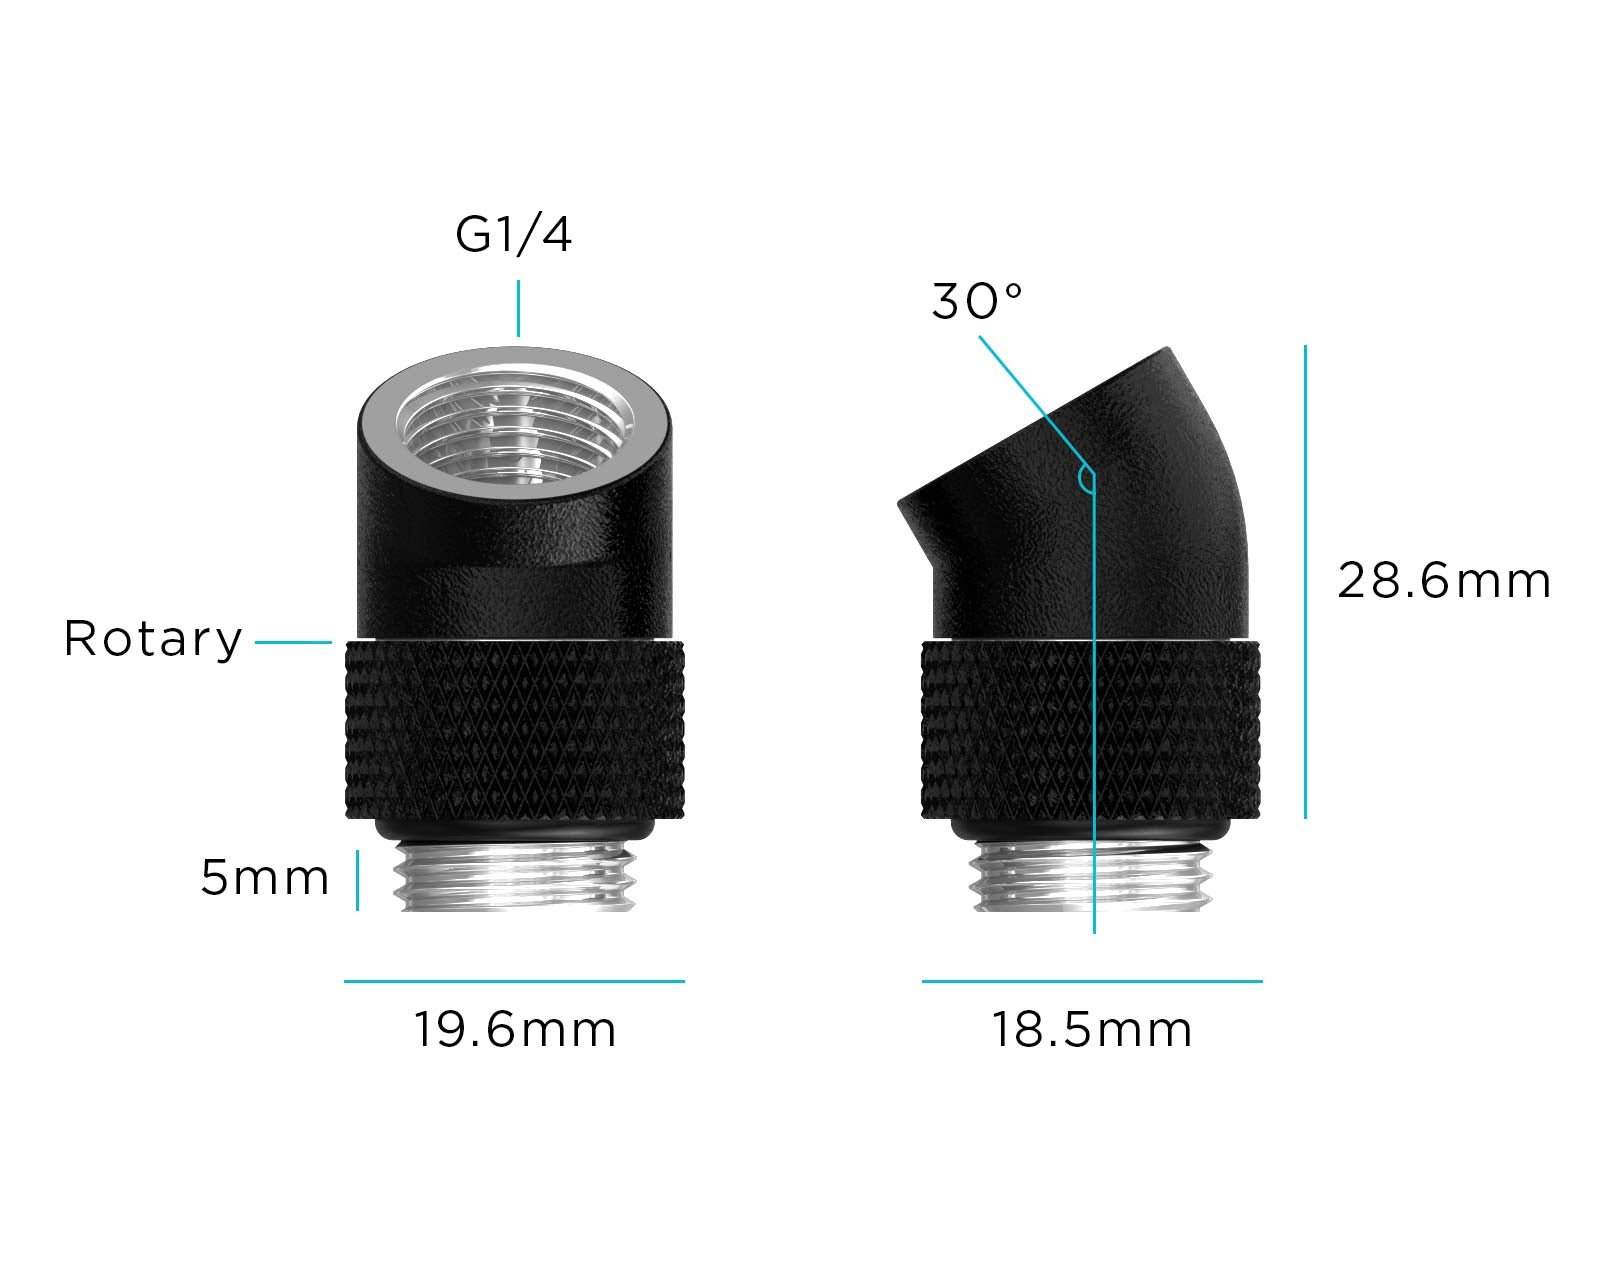 BSTOCK:PrimoChill Male to Female G 1/4in. 30 Degree SX Rotary Elbow Fitting - Satin Black